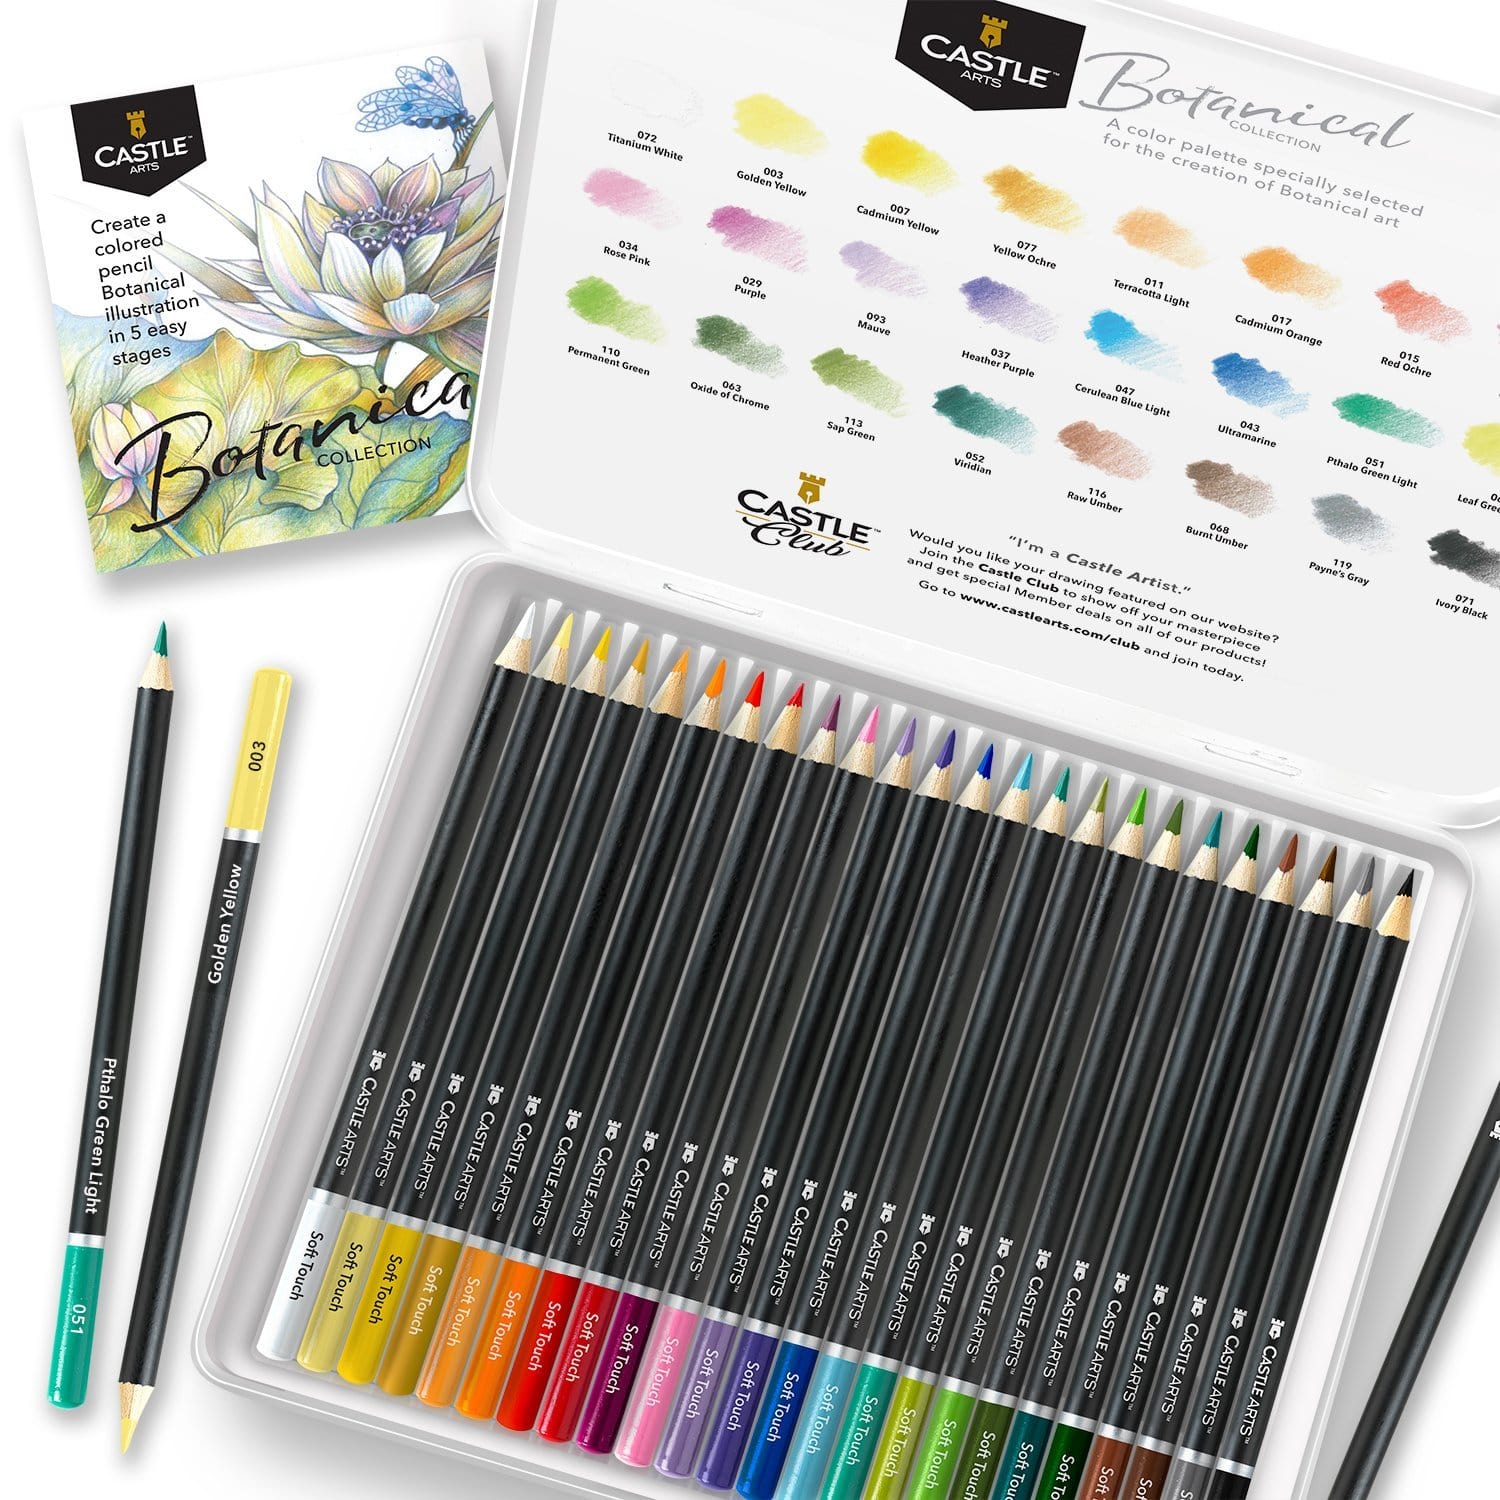 Castle Arts 24 Piece Botanical Colored Pencil Set in Display Tin